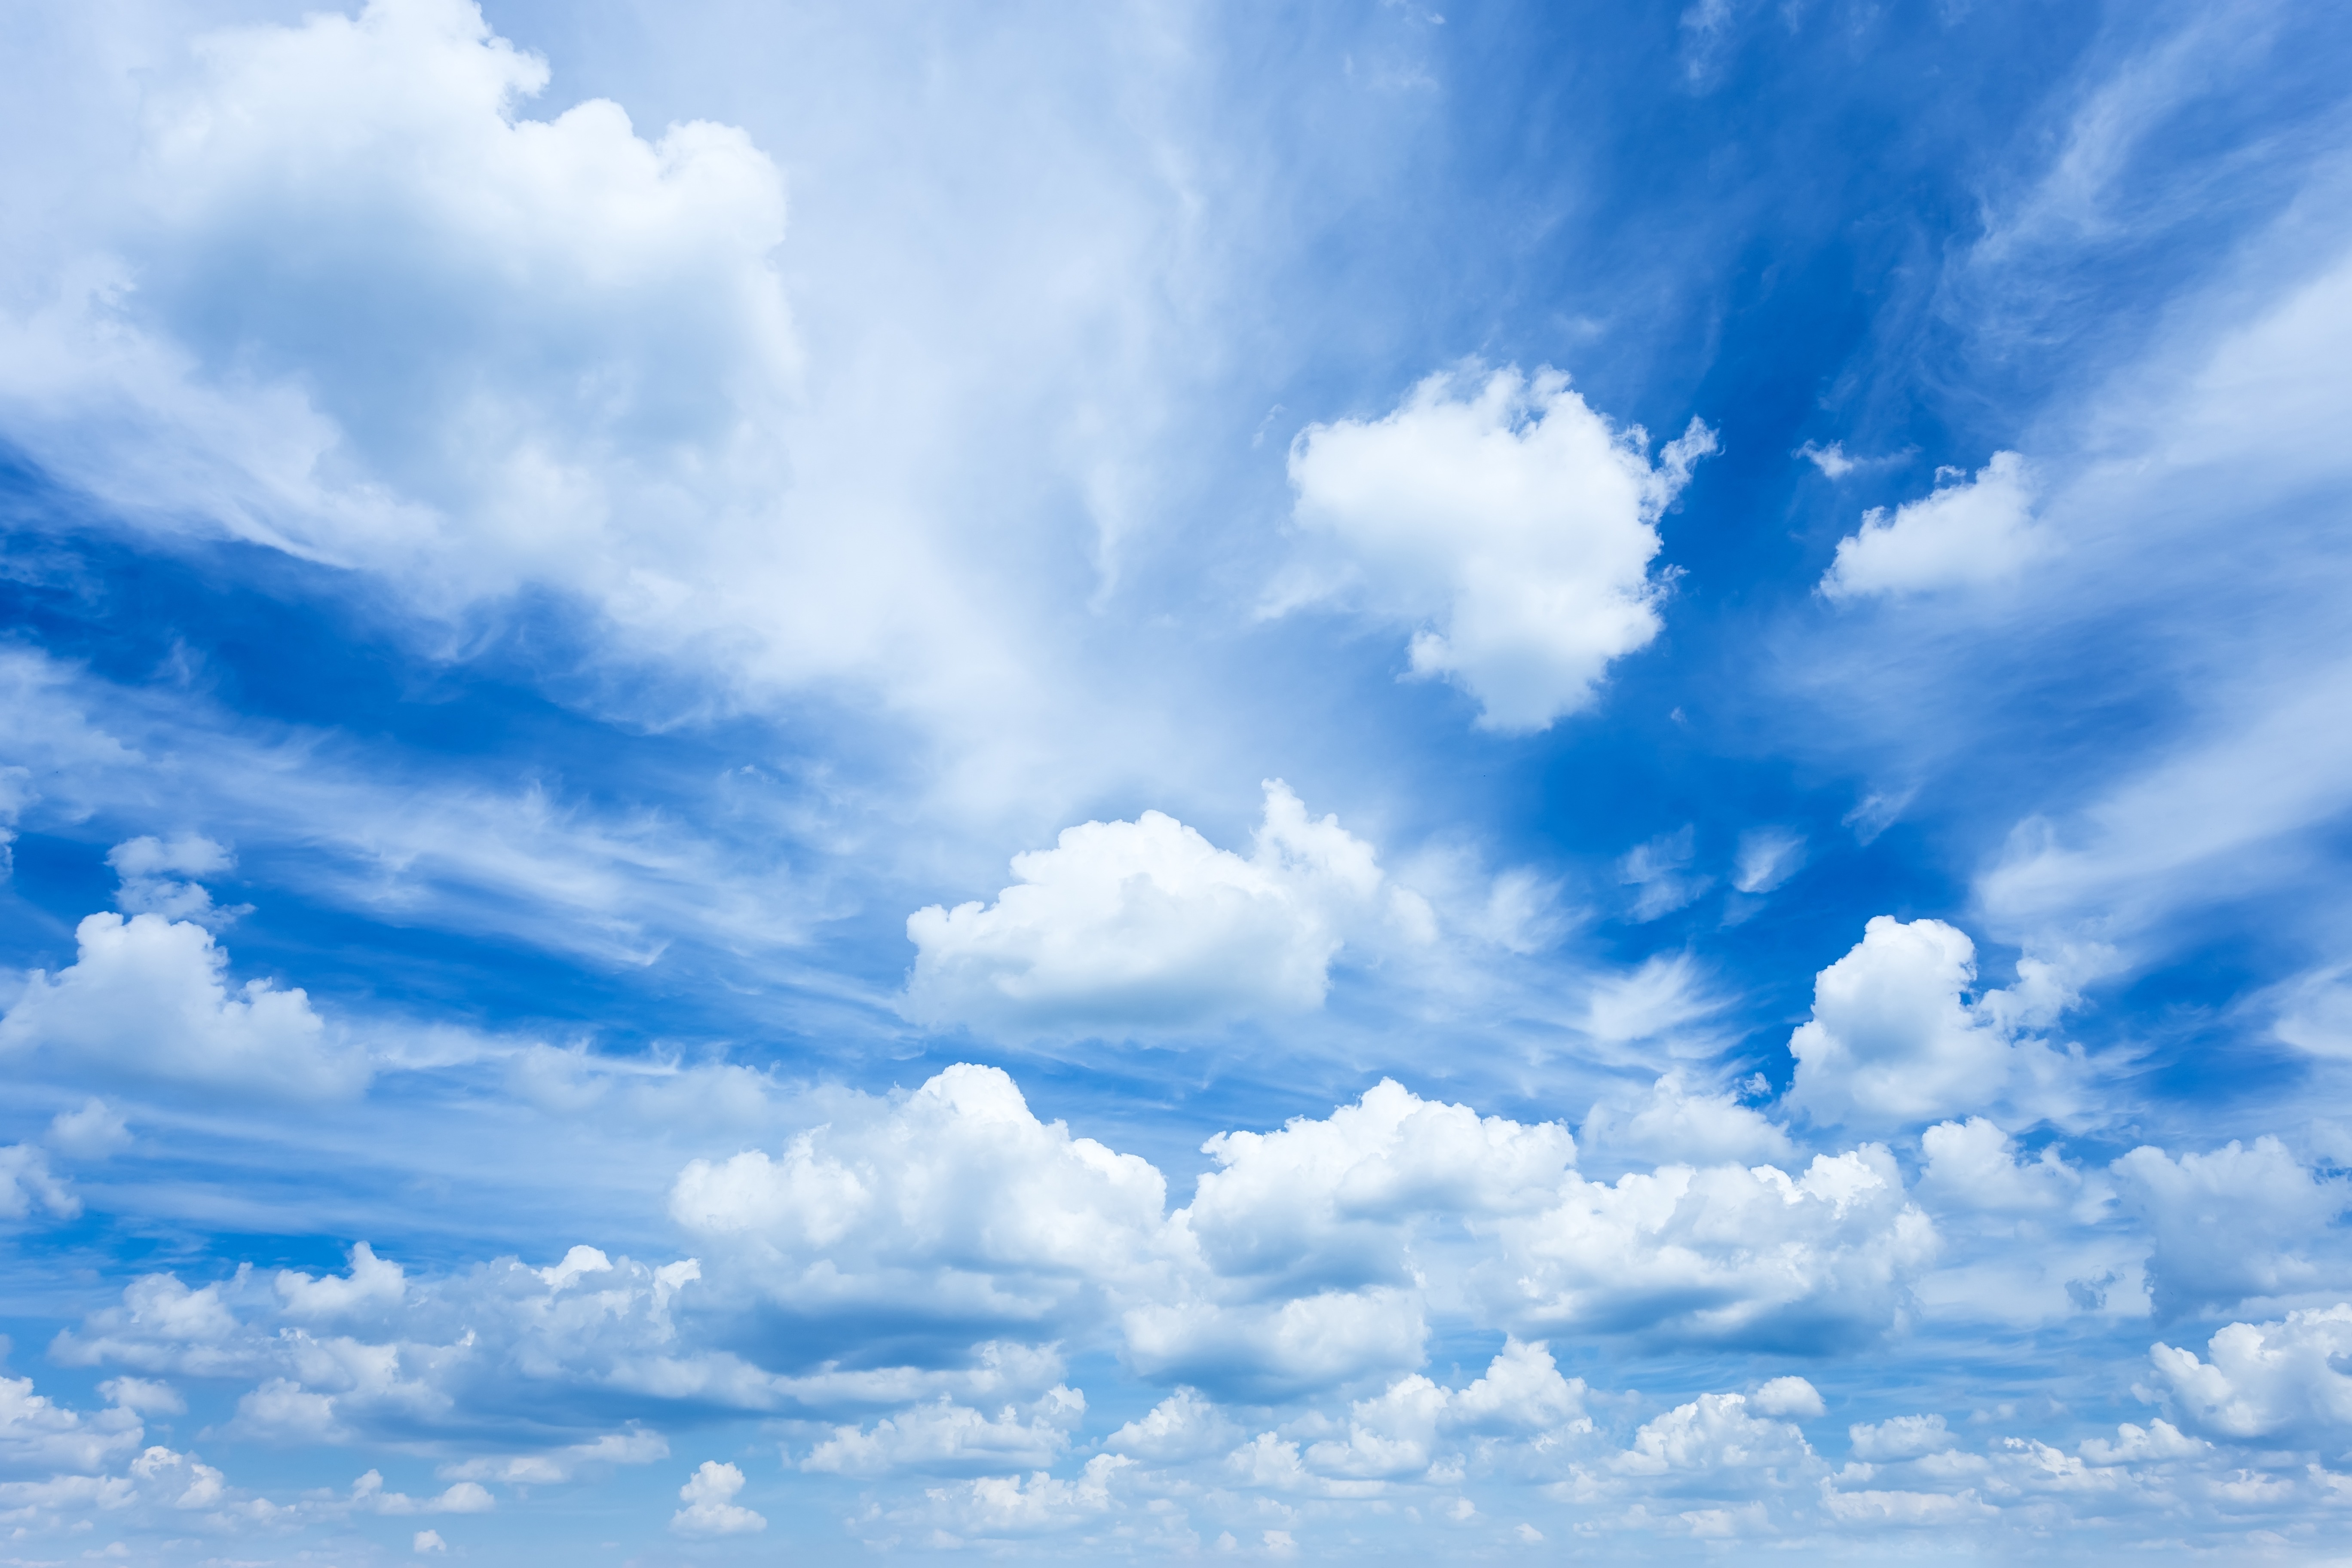 General 5472x3648 sky clouds nature outdoors minimalism simple background